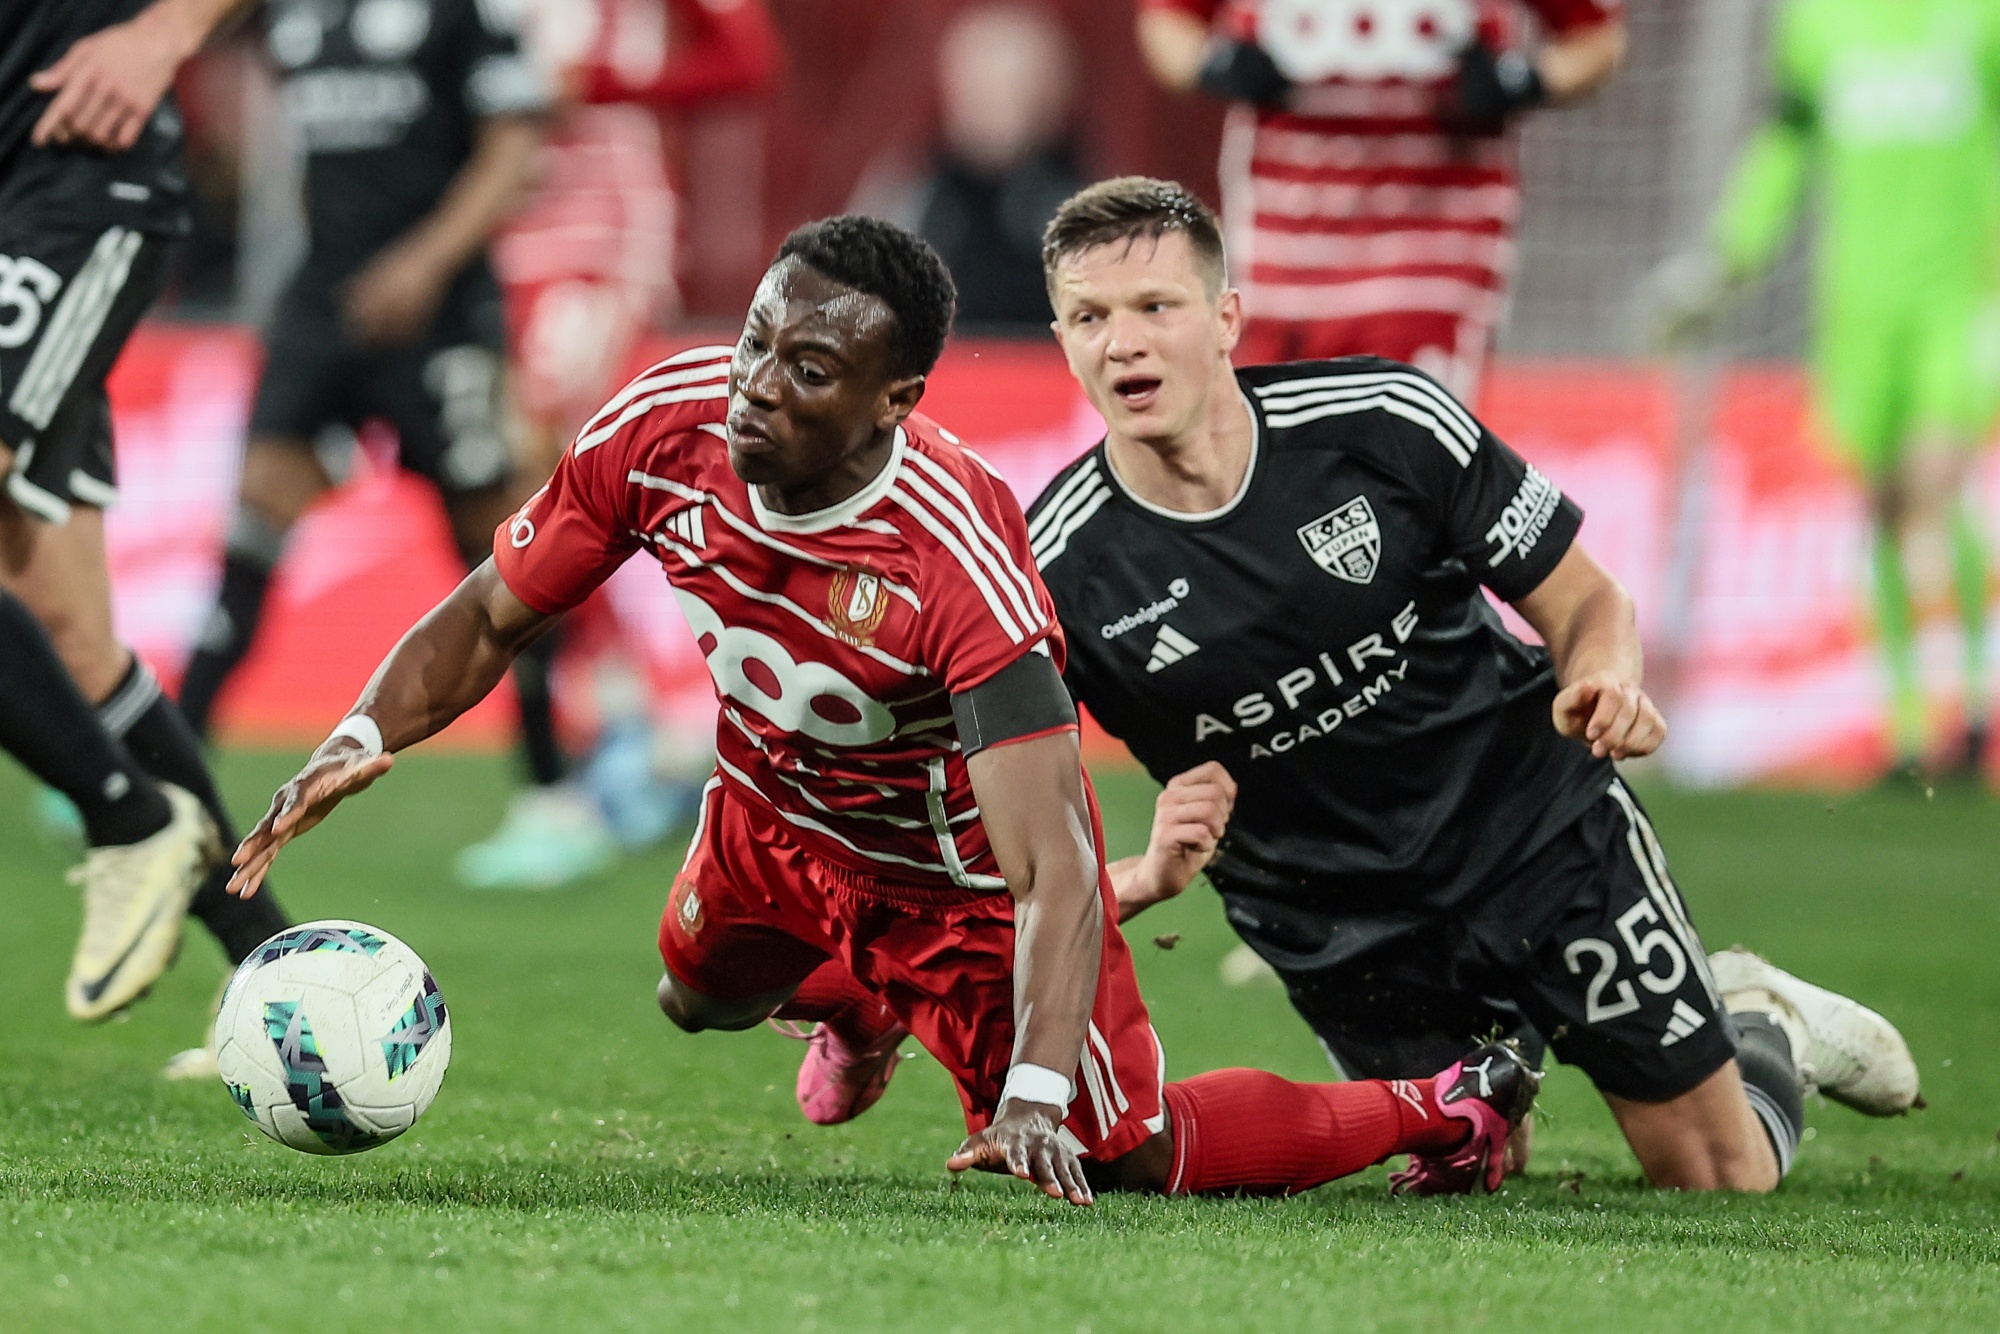 Standard's Kelvin Yeboah and Eupen's Aleksander Filin fight for the ball during a soccer match between Standard de Liege and KAS Eupen, Saturday 16 March 2024 in Liege, on the last day (30/30) of the 2023-2024 season of the 'Jupiler Pro League' first division of the Belgian championship. BELGA PHOTO BRUNO FAHY